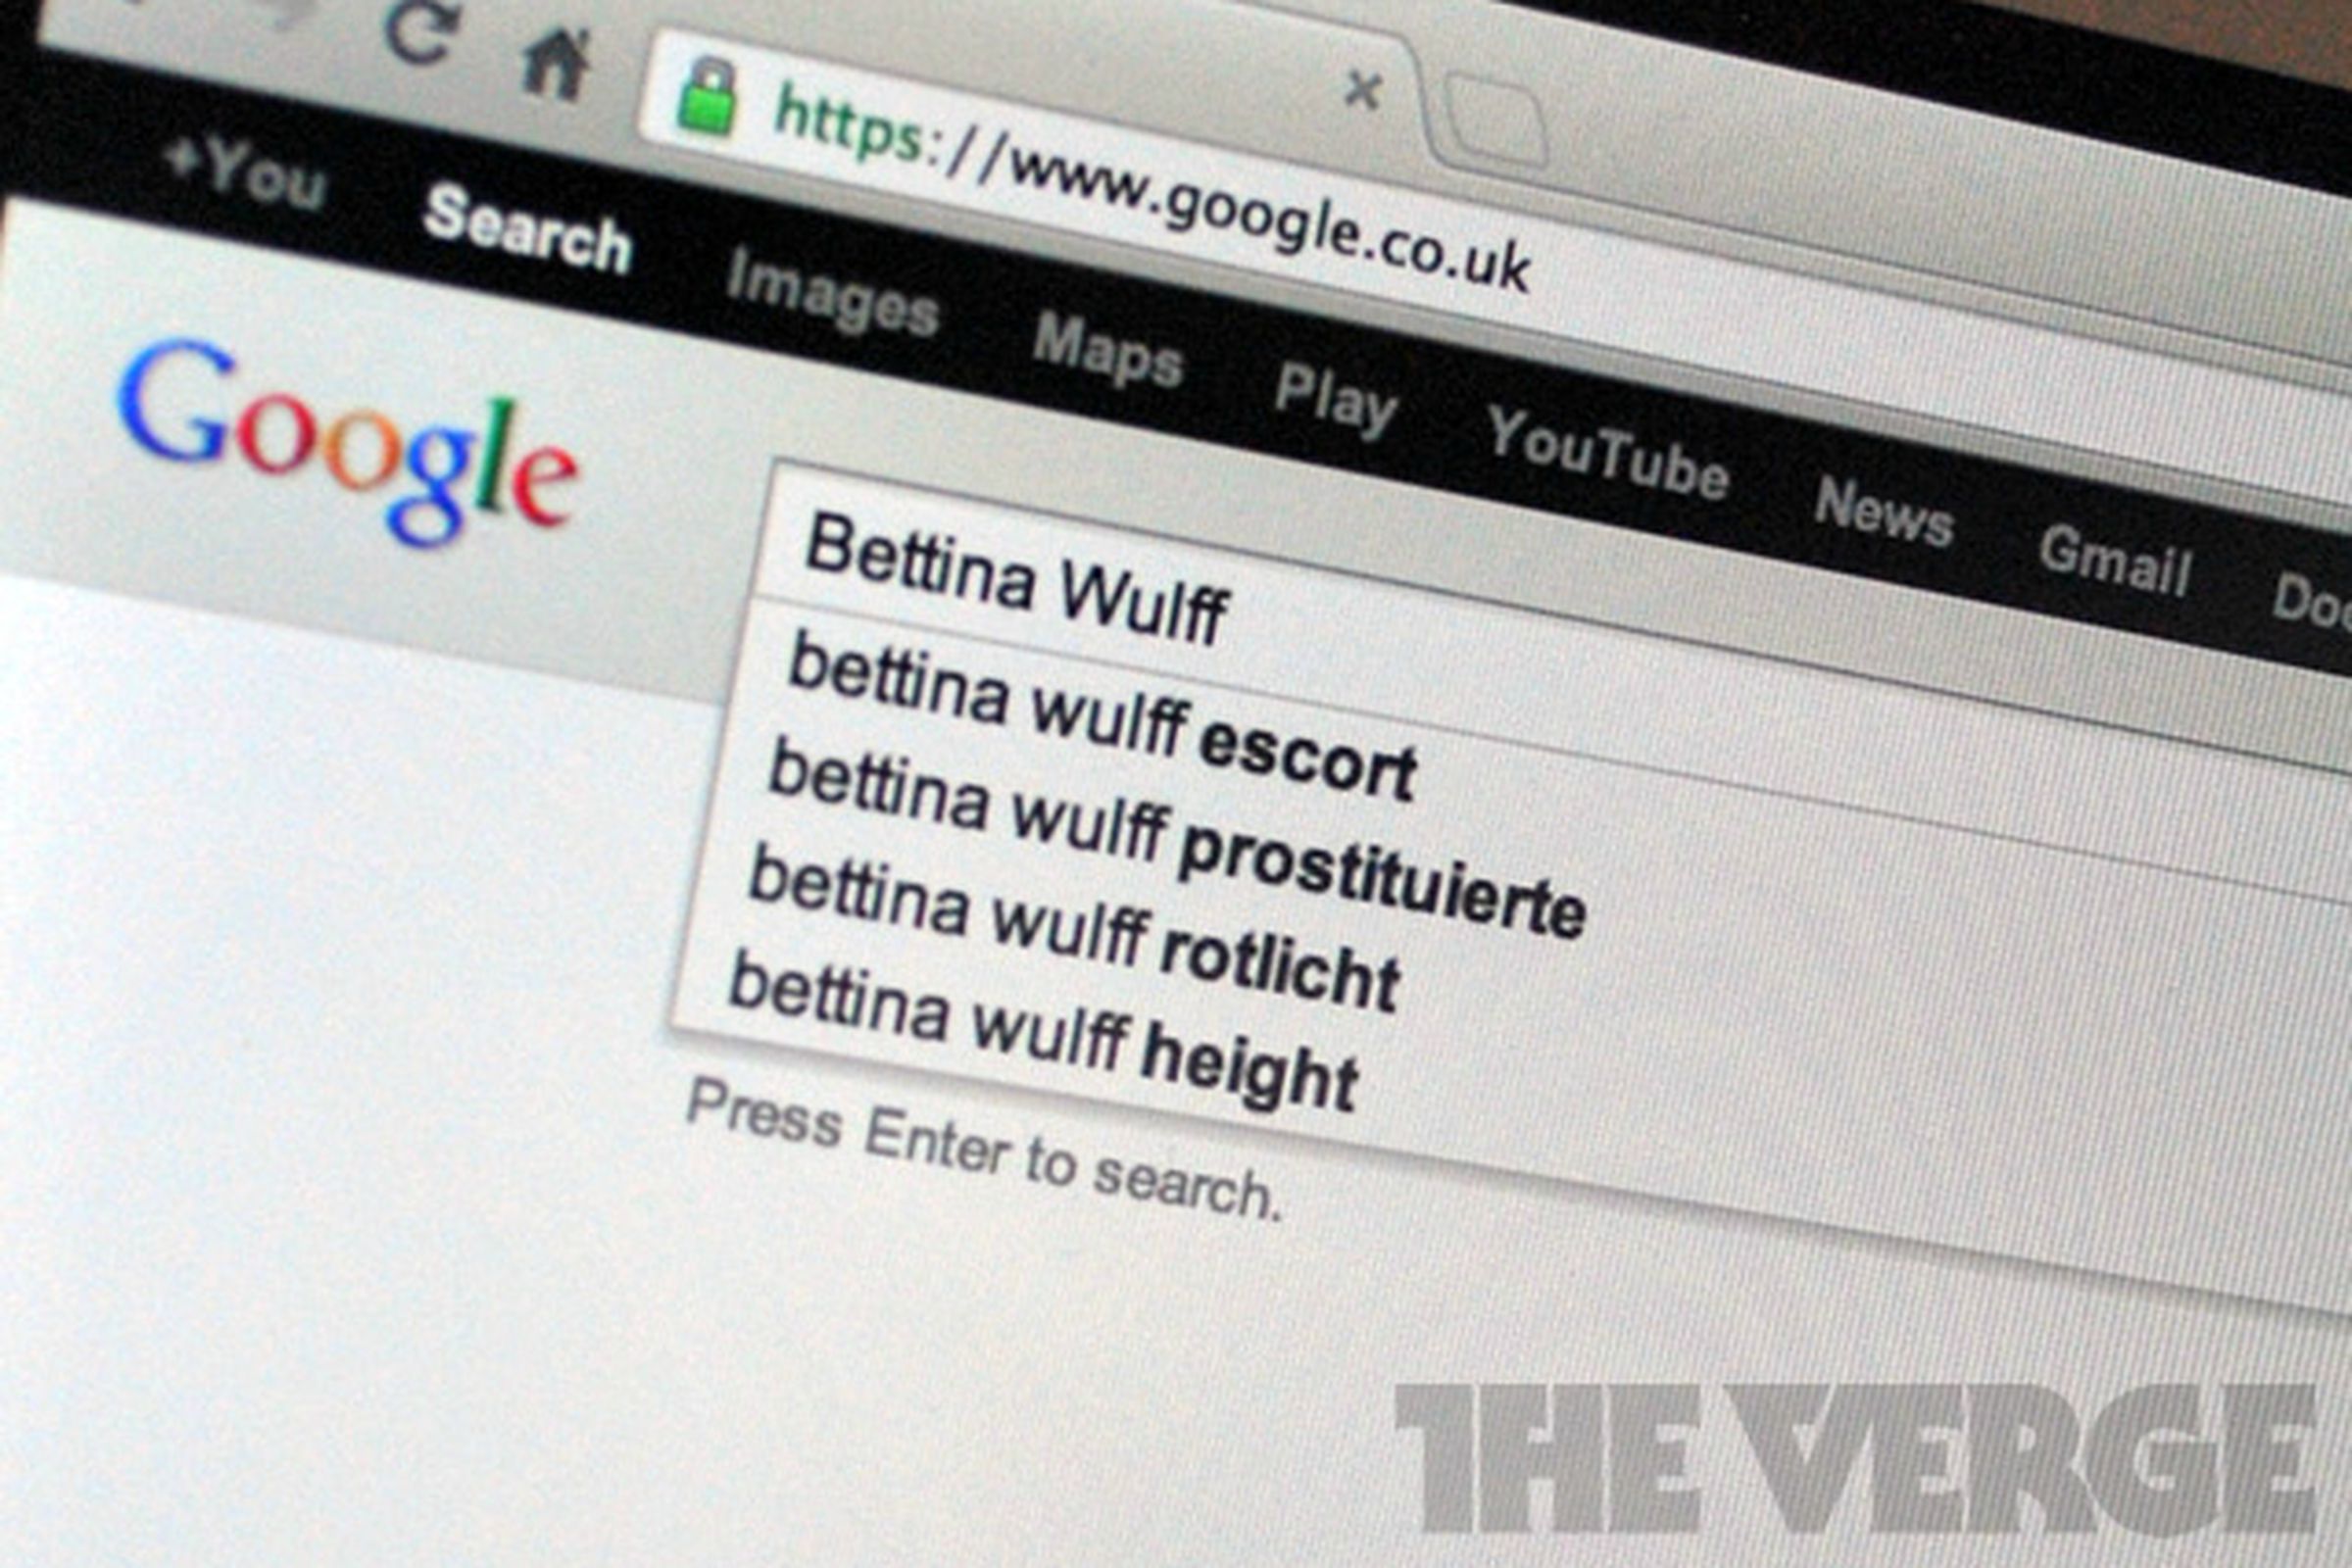 Bettina Wulff autocomplete results